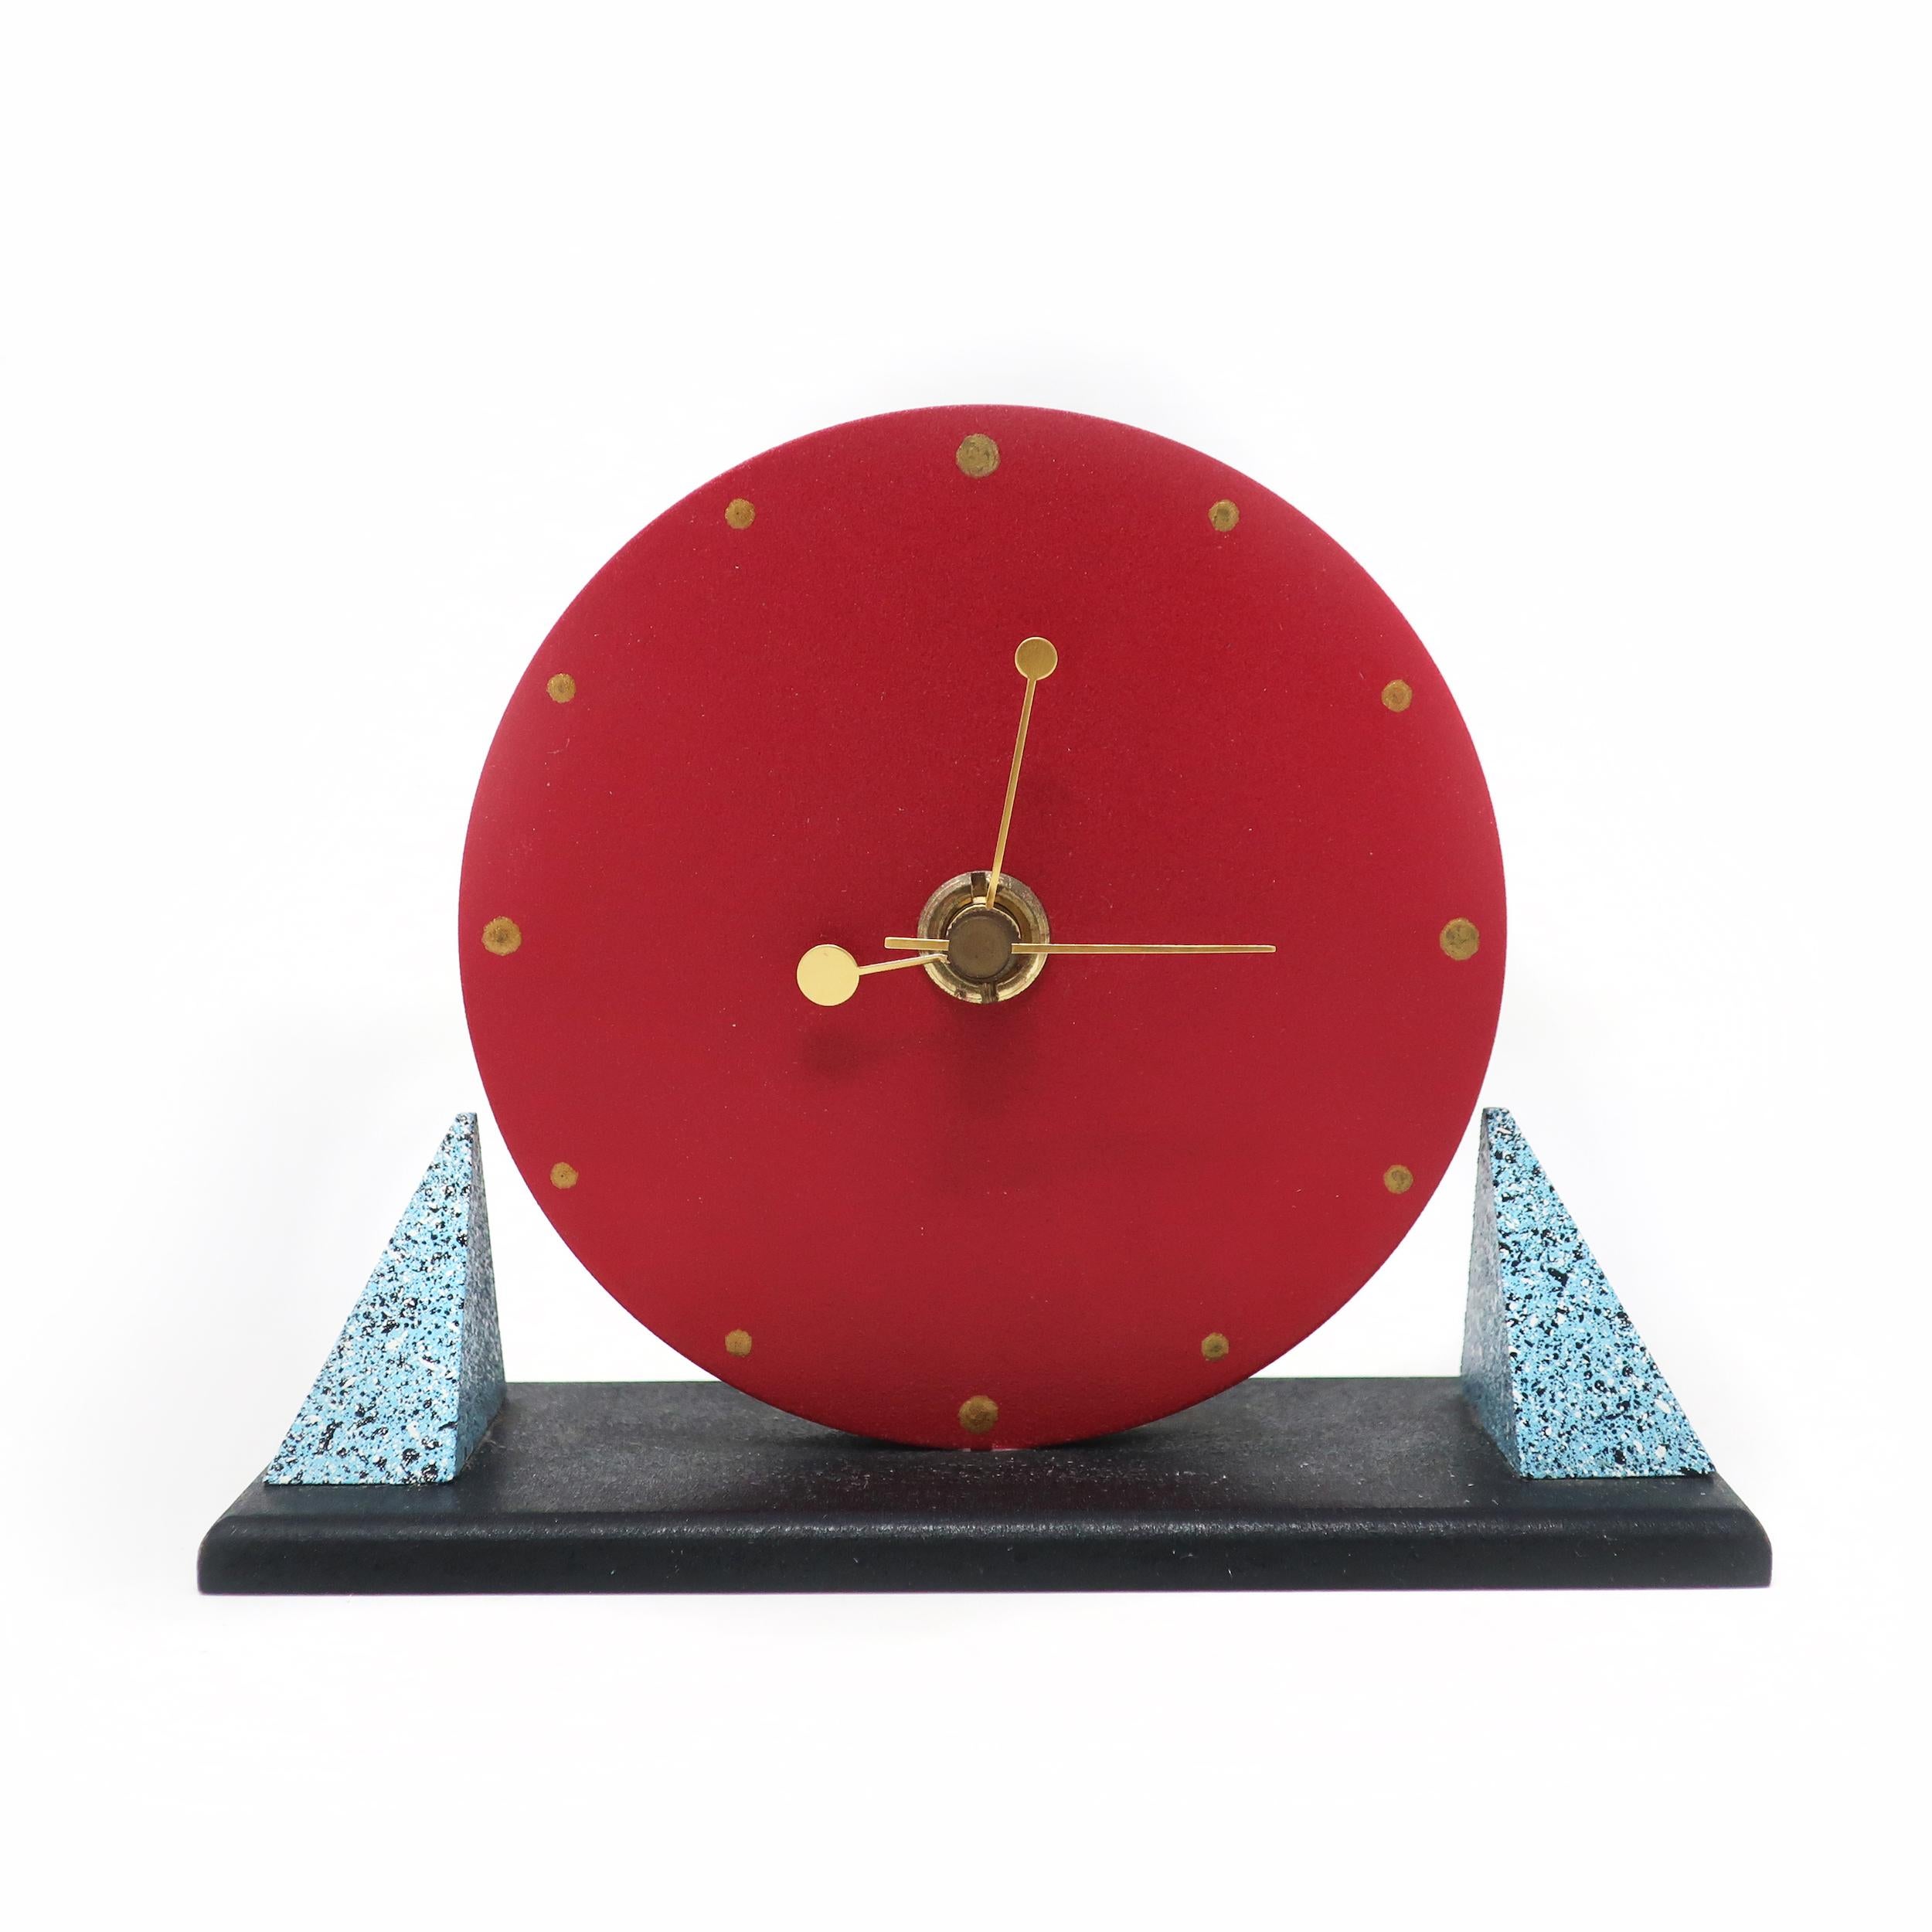 A sophisticated yet adorable postmodern desk clock with a red face, blue speckled triangular supports, black base, and brass hands and numbers. Made in Japan and in very good vintage condition with wear consistent with age and use.

Measures: 6